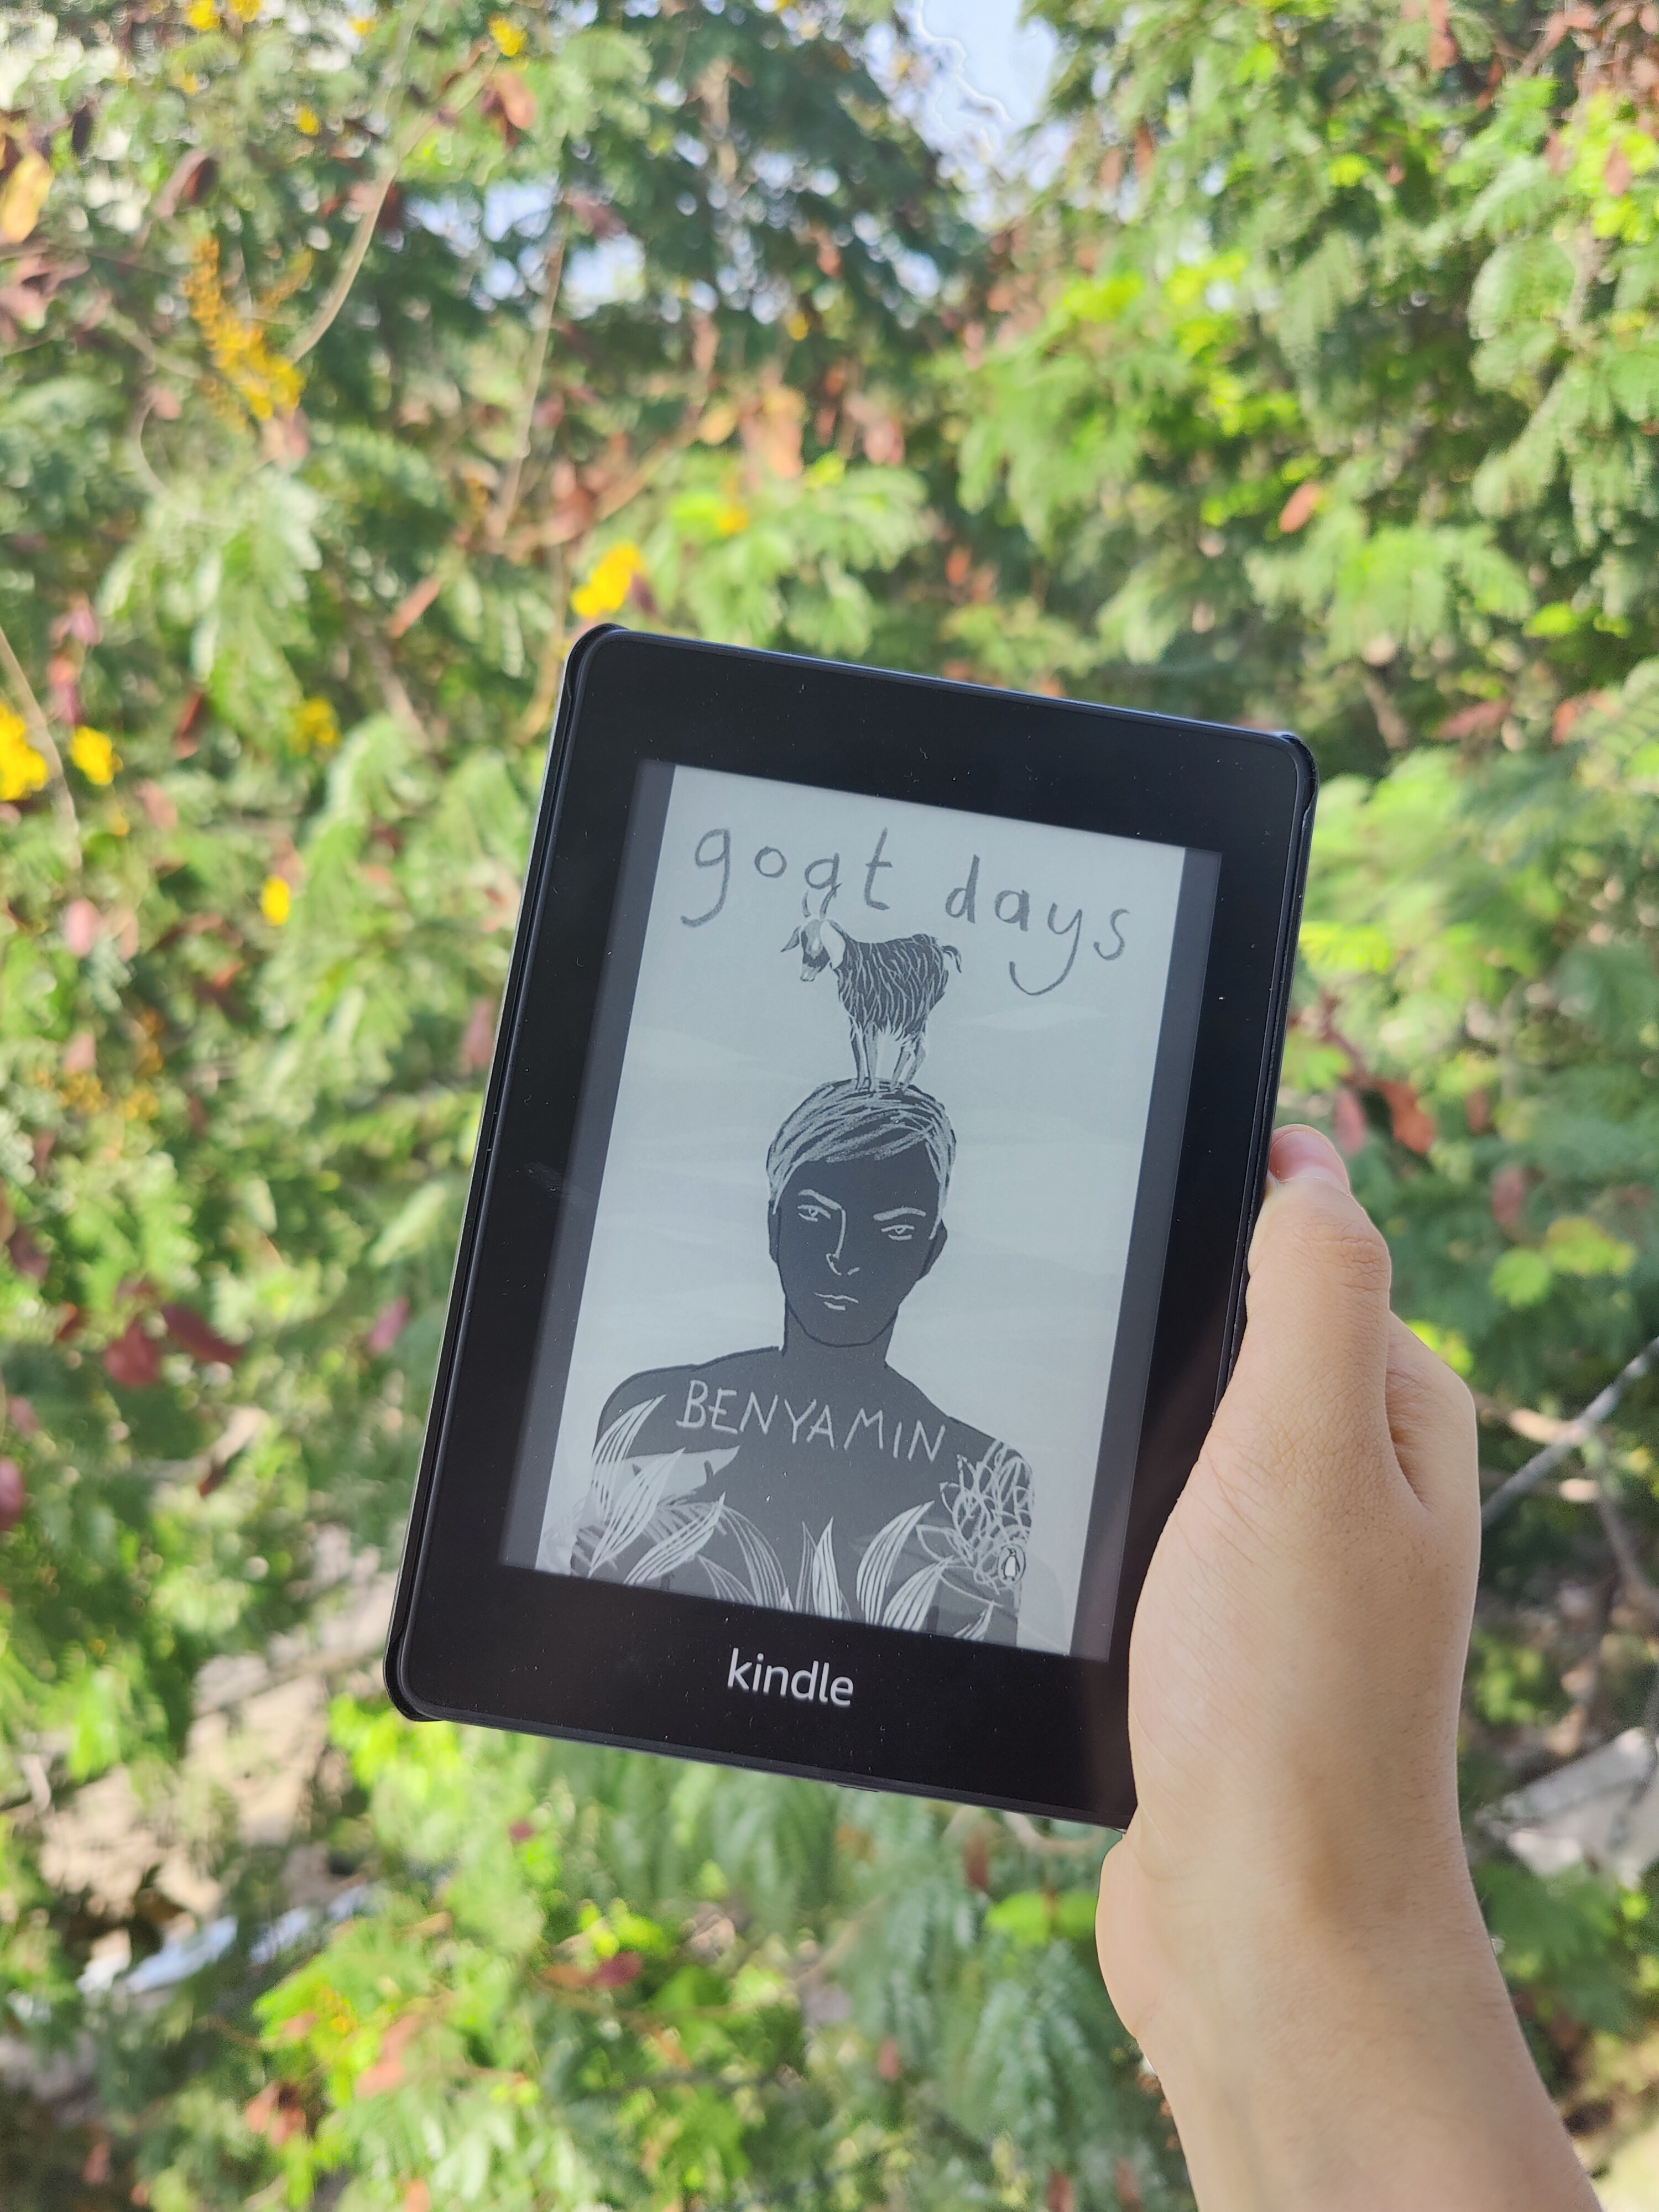 The cover photo of &#x27;Goat Days&#x27; by Benyamin seen on a Kindle.